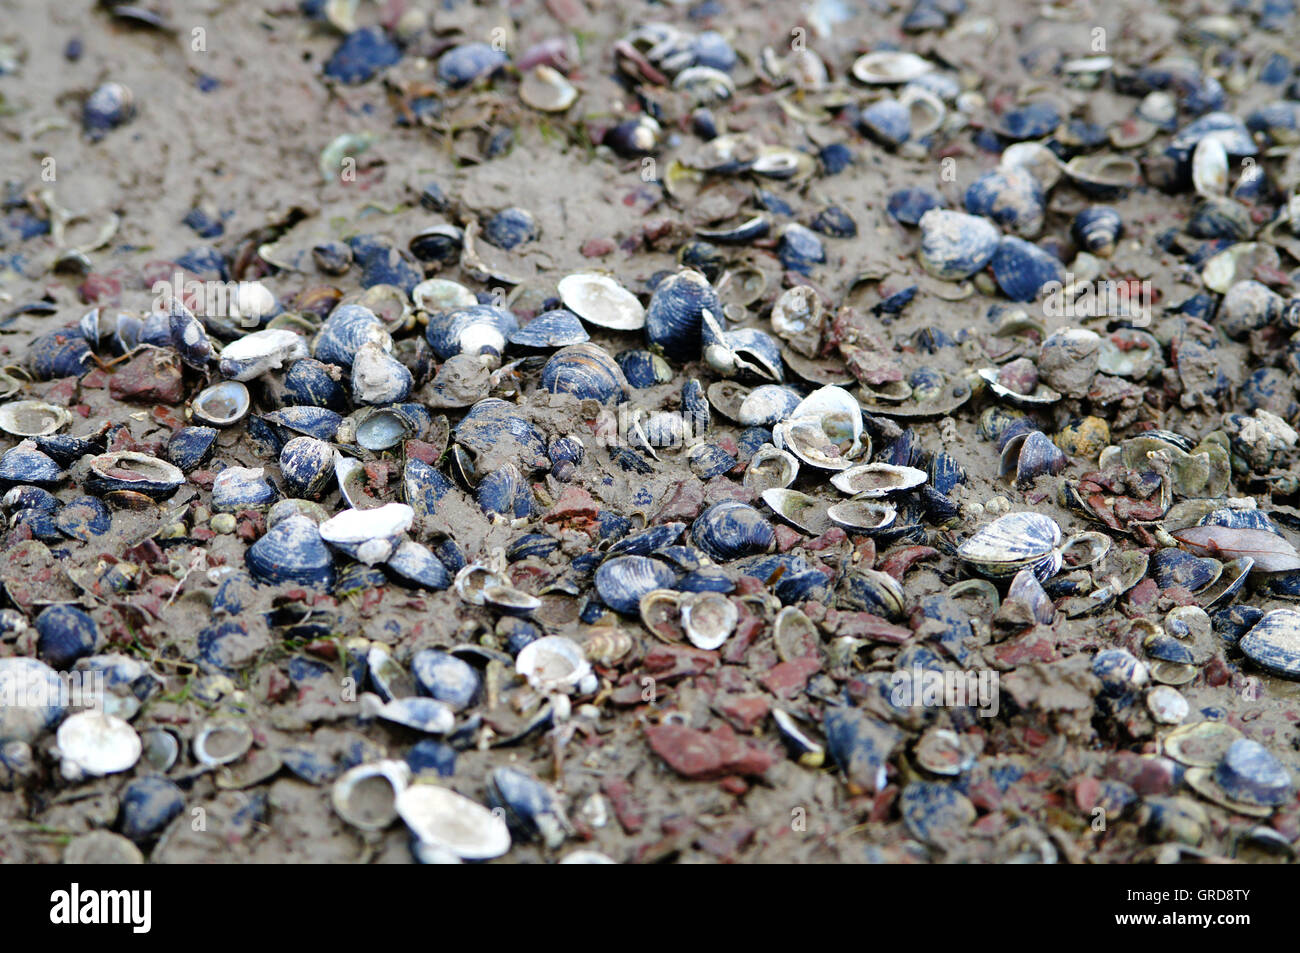 Mussels In The Rhine River Stock Photo